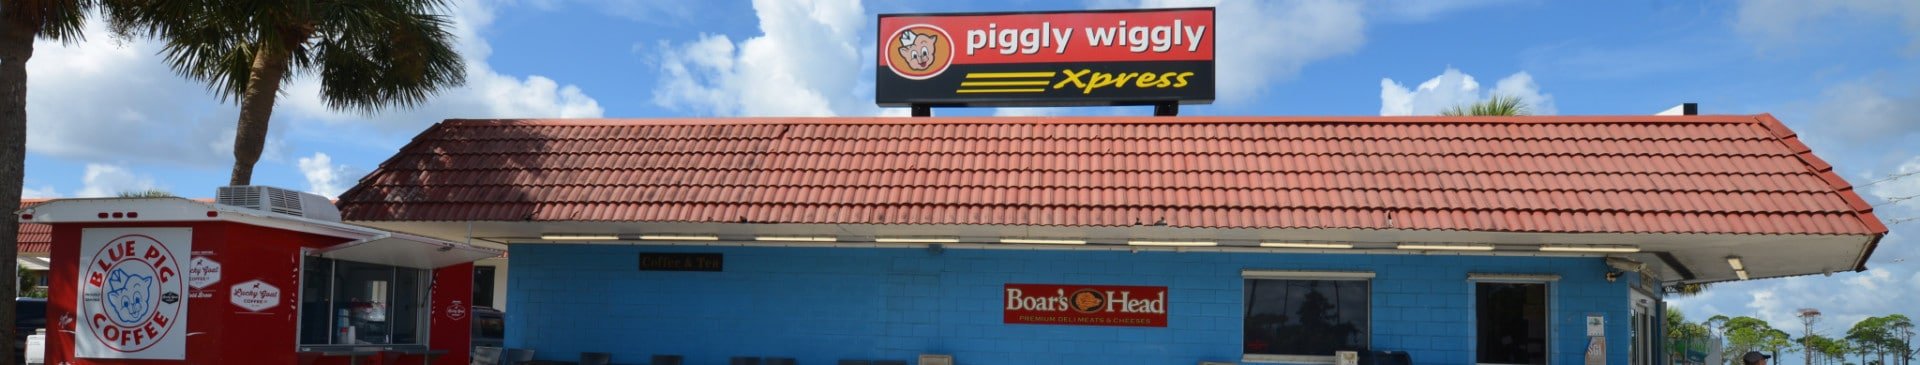 Piggly Wiggly Xpress on St. George Island